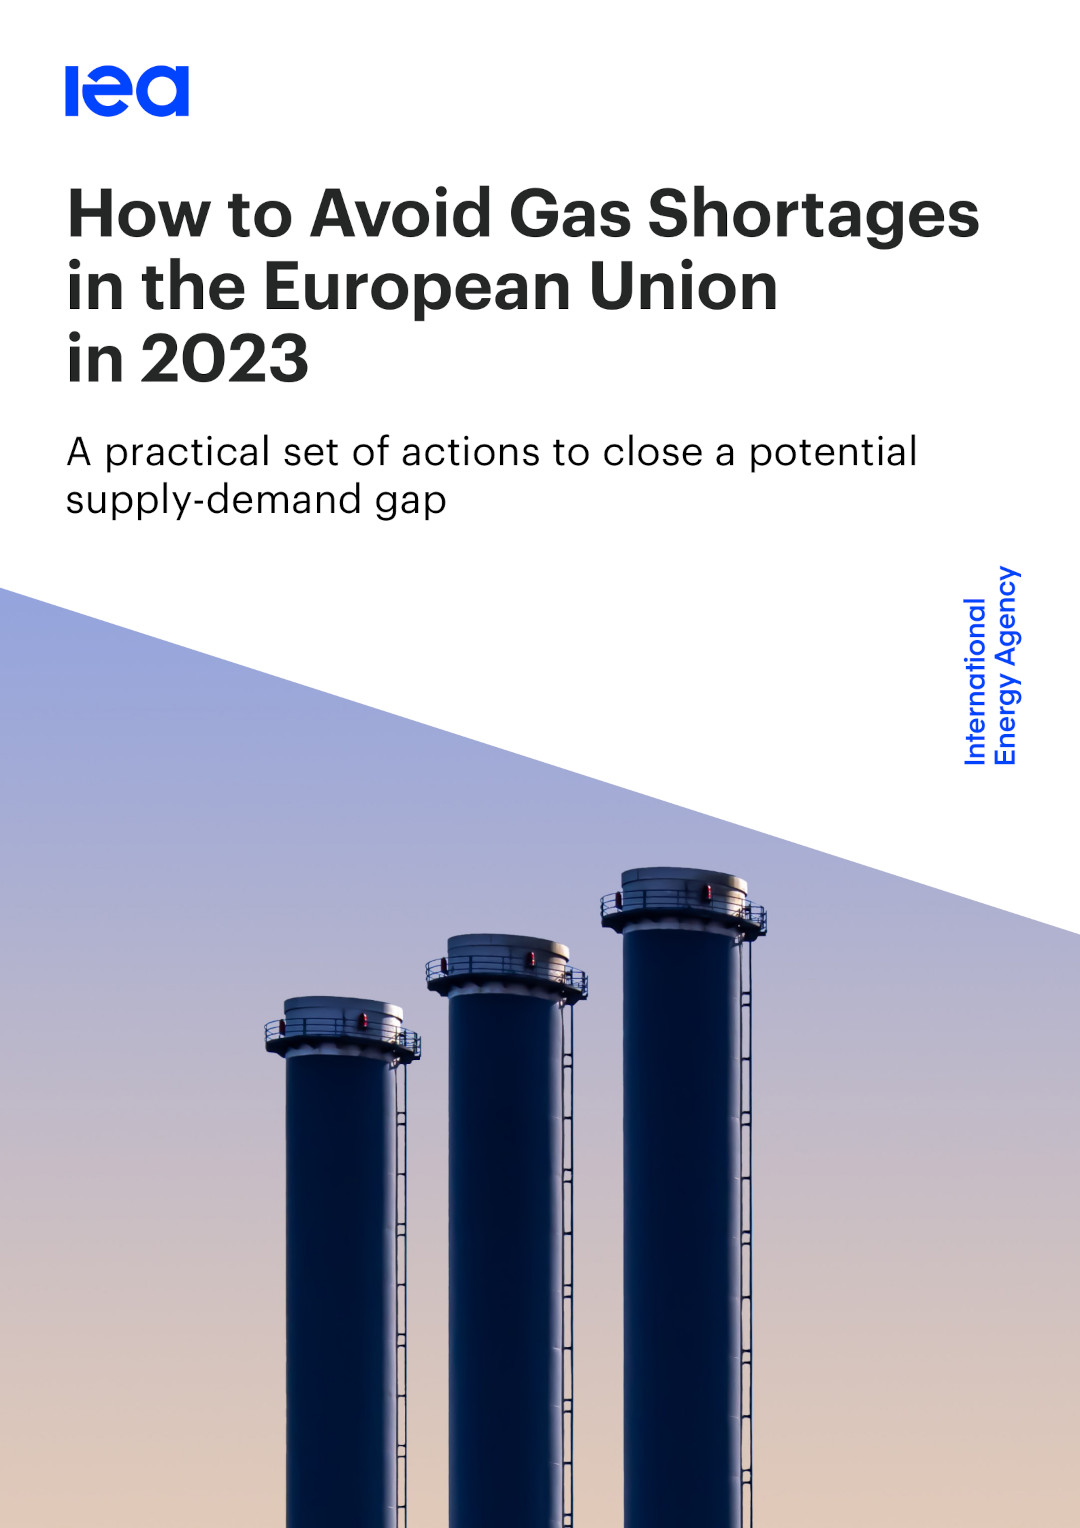 Emailing IEA Latest Report For EU Natural Gas Shortages In 2023 